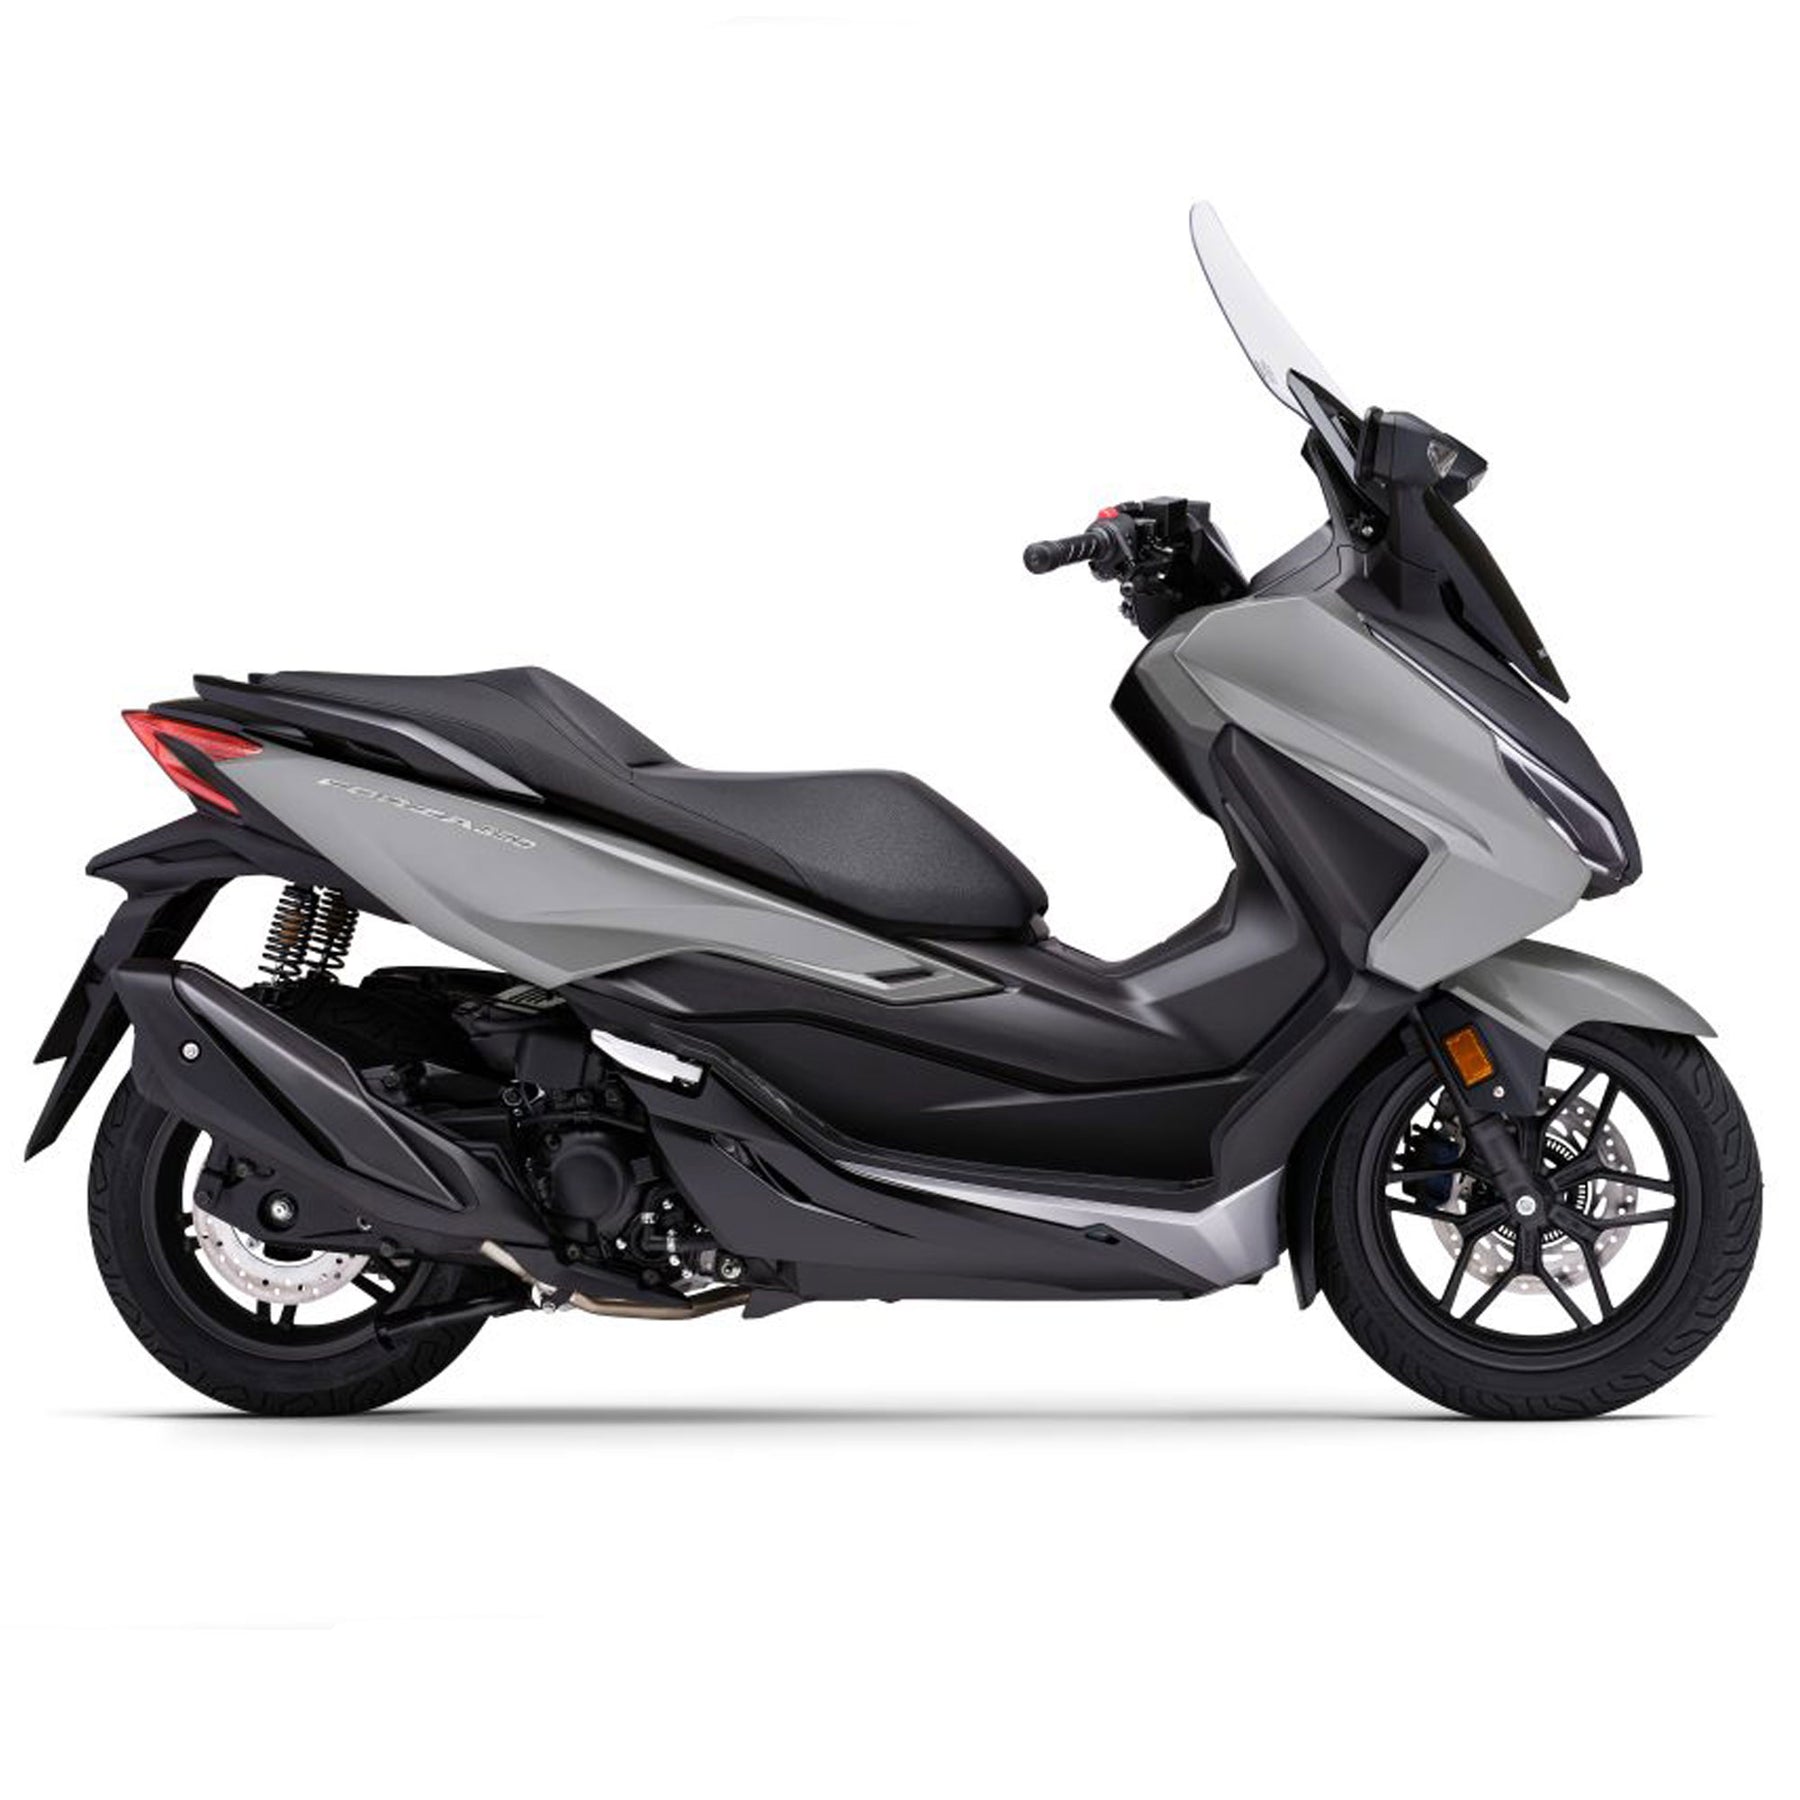 Scooters for Sale Bournemouth | Honda of Bournemouth | Forza 350